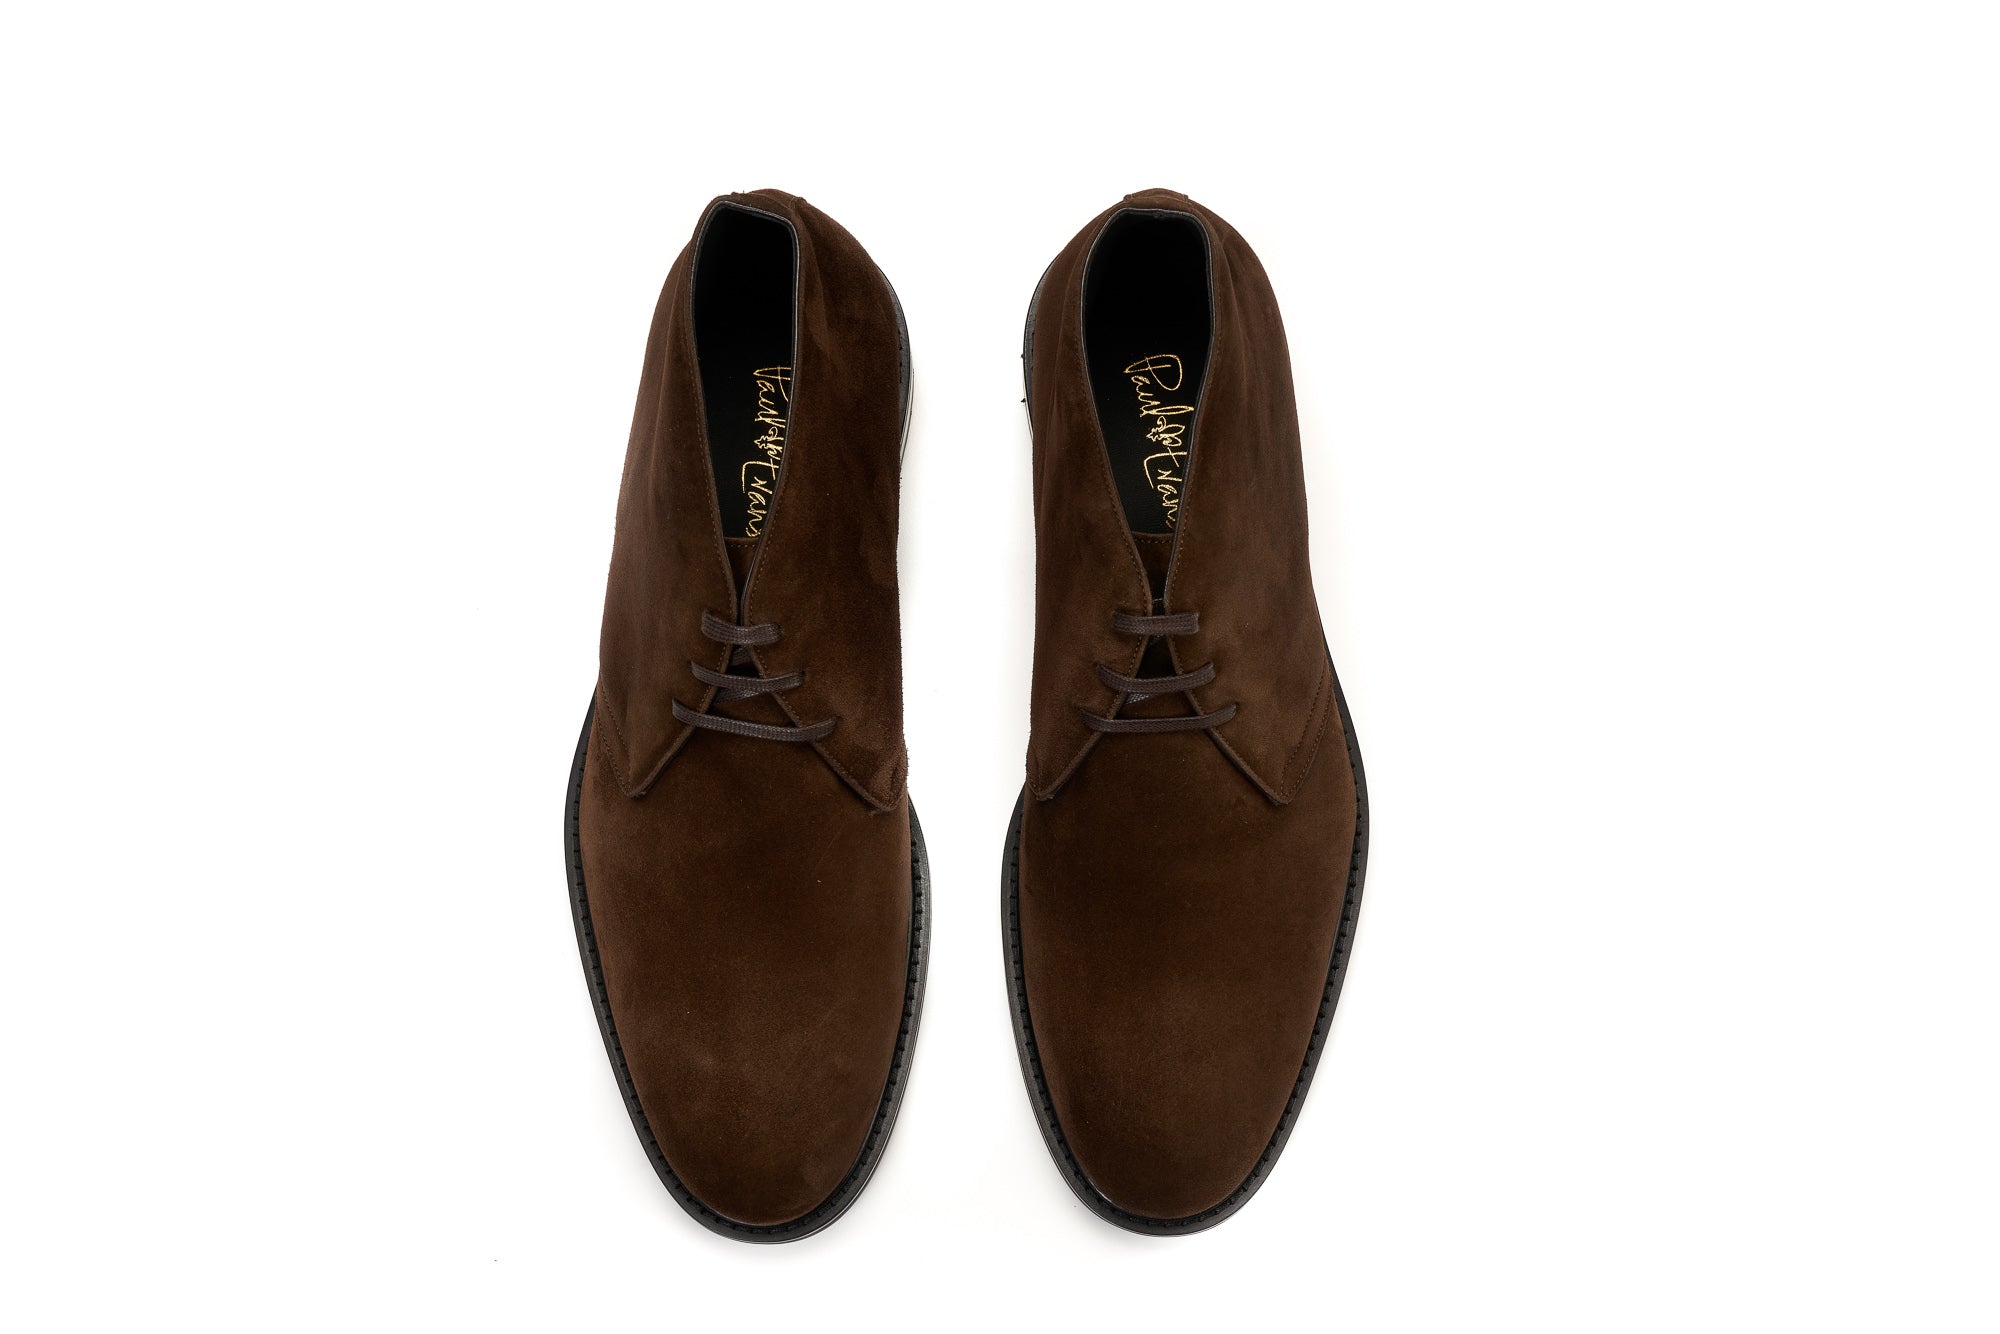 The Agnelli Chukka Boot - Brown Suede